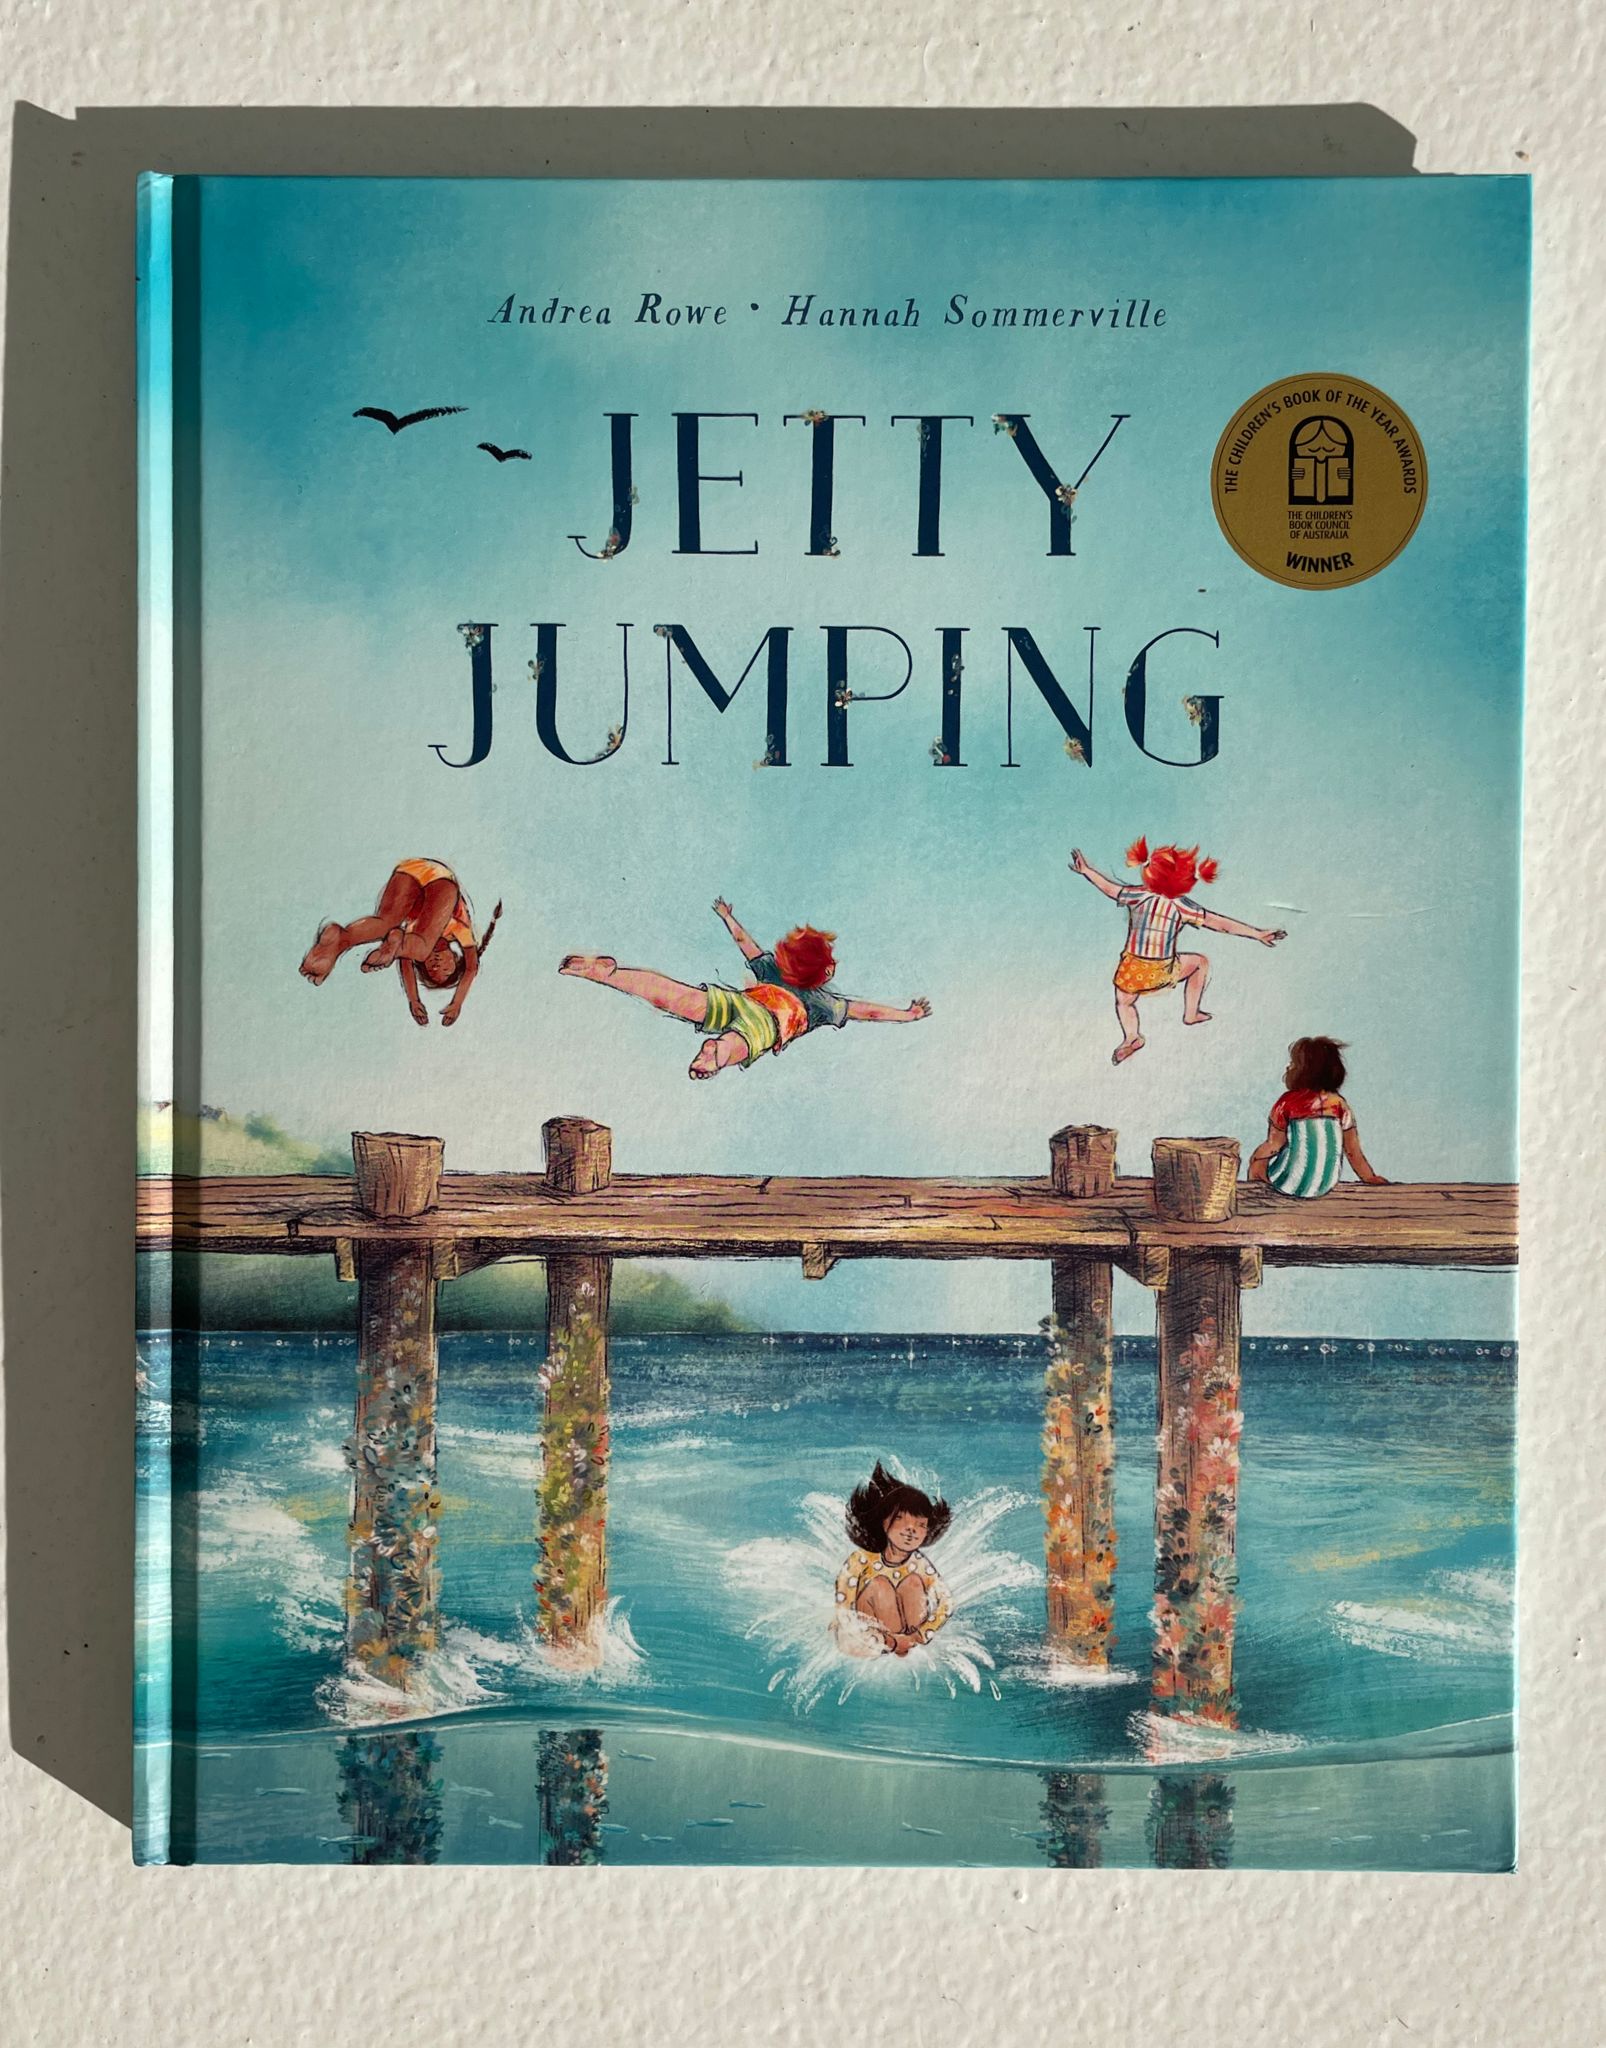 JETTY JUMPING